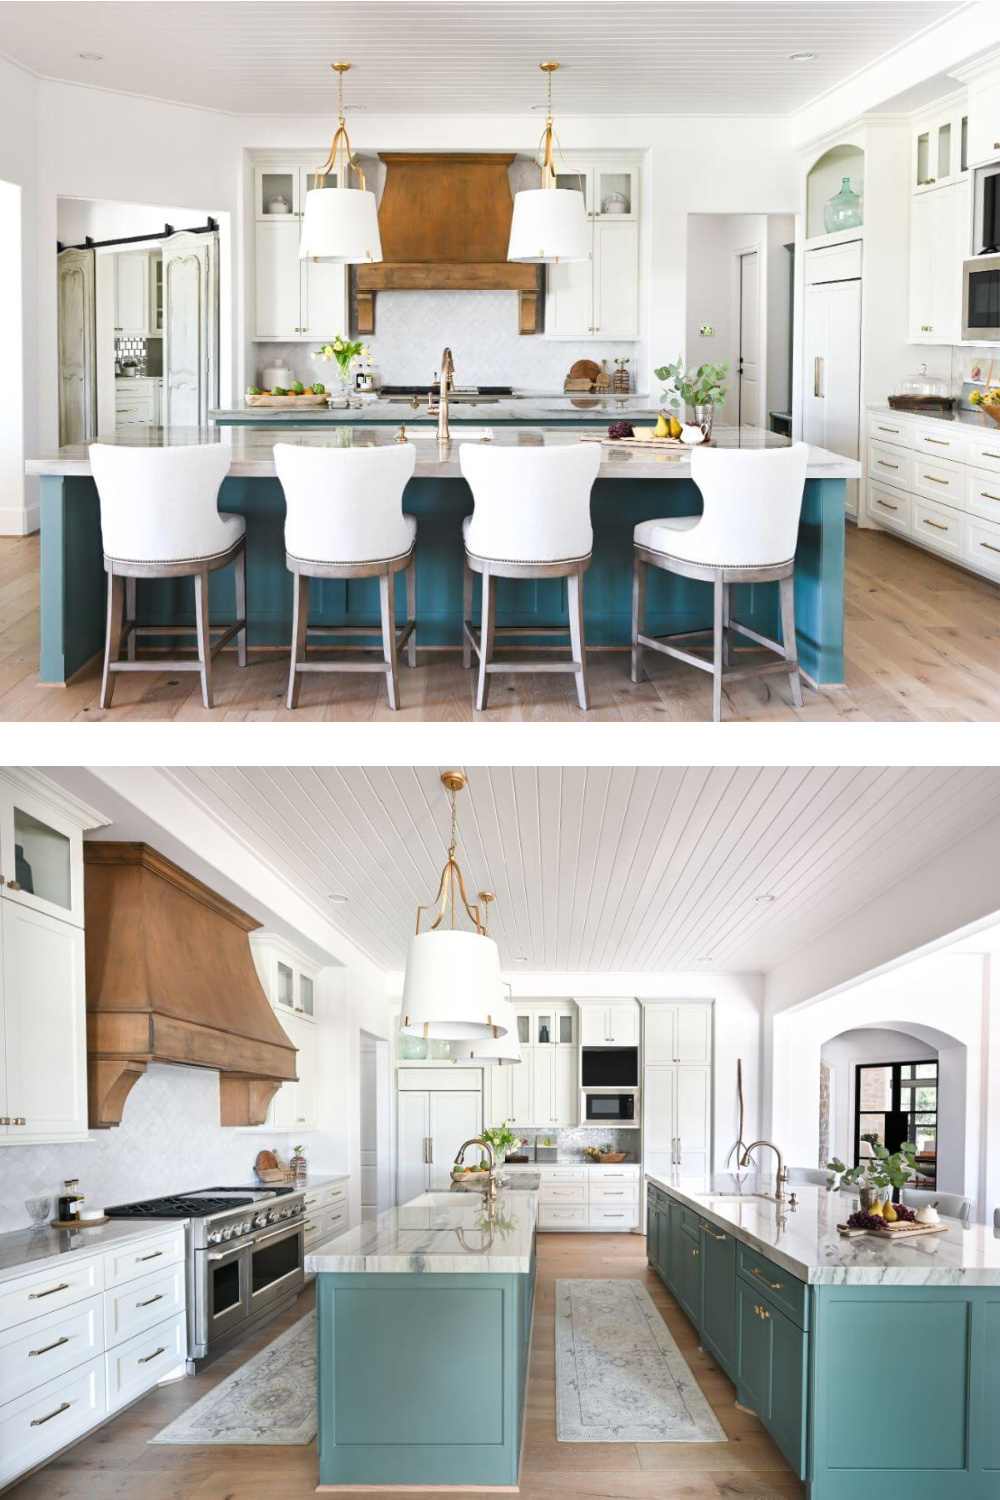 Modern French country kitchen with teal painted island, wood range hood, and paneled refrigerator - Morningstar Builders. #modernfrenchkitchen #frenchcountryinteriors